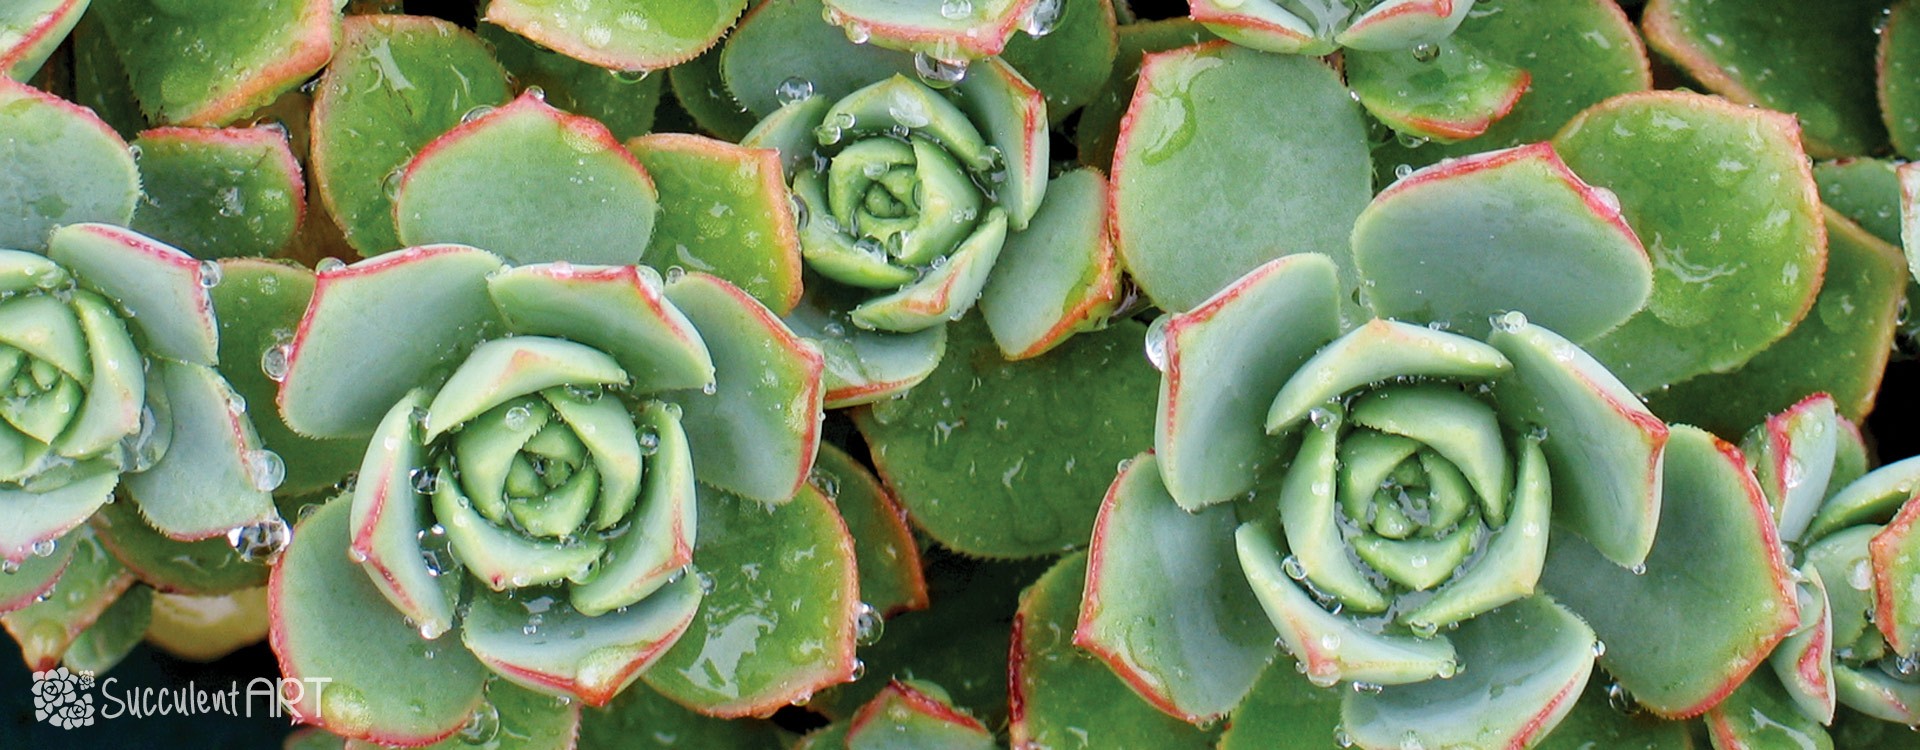 How to Prepare your Succulents for Winter